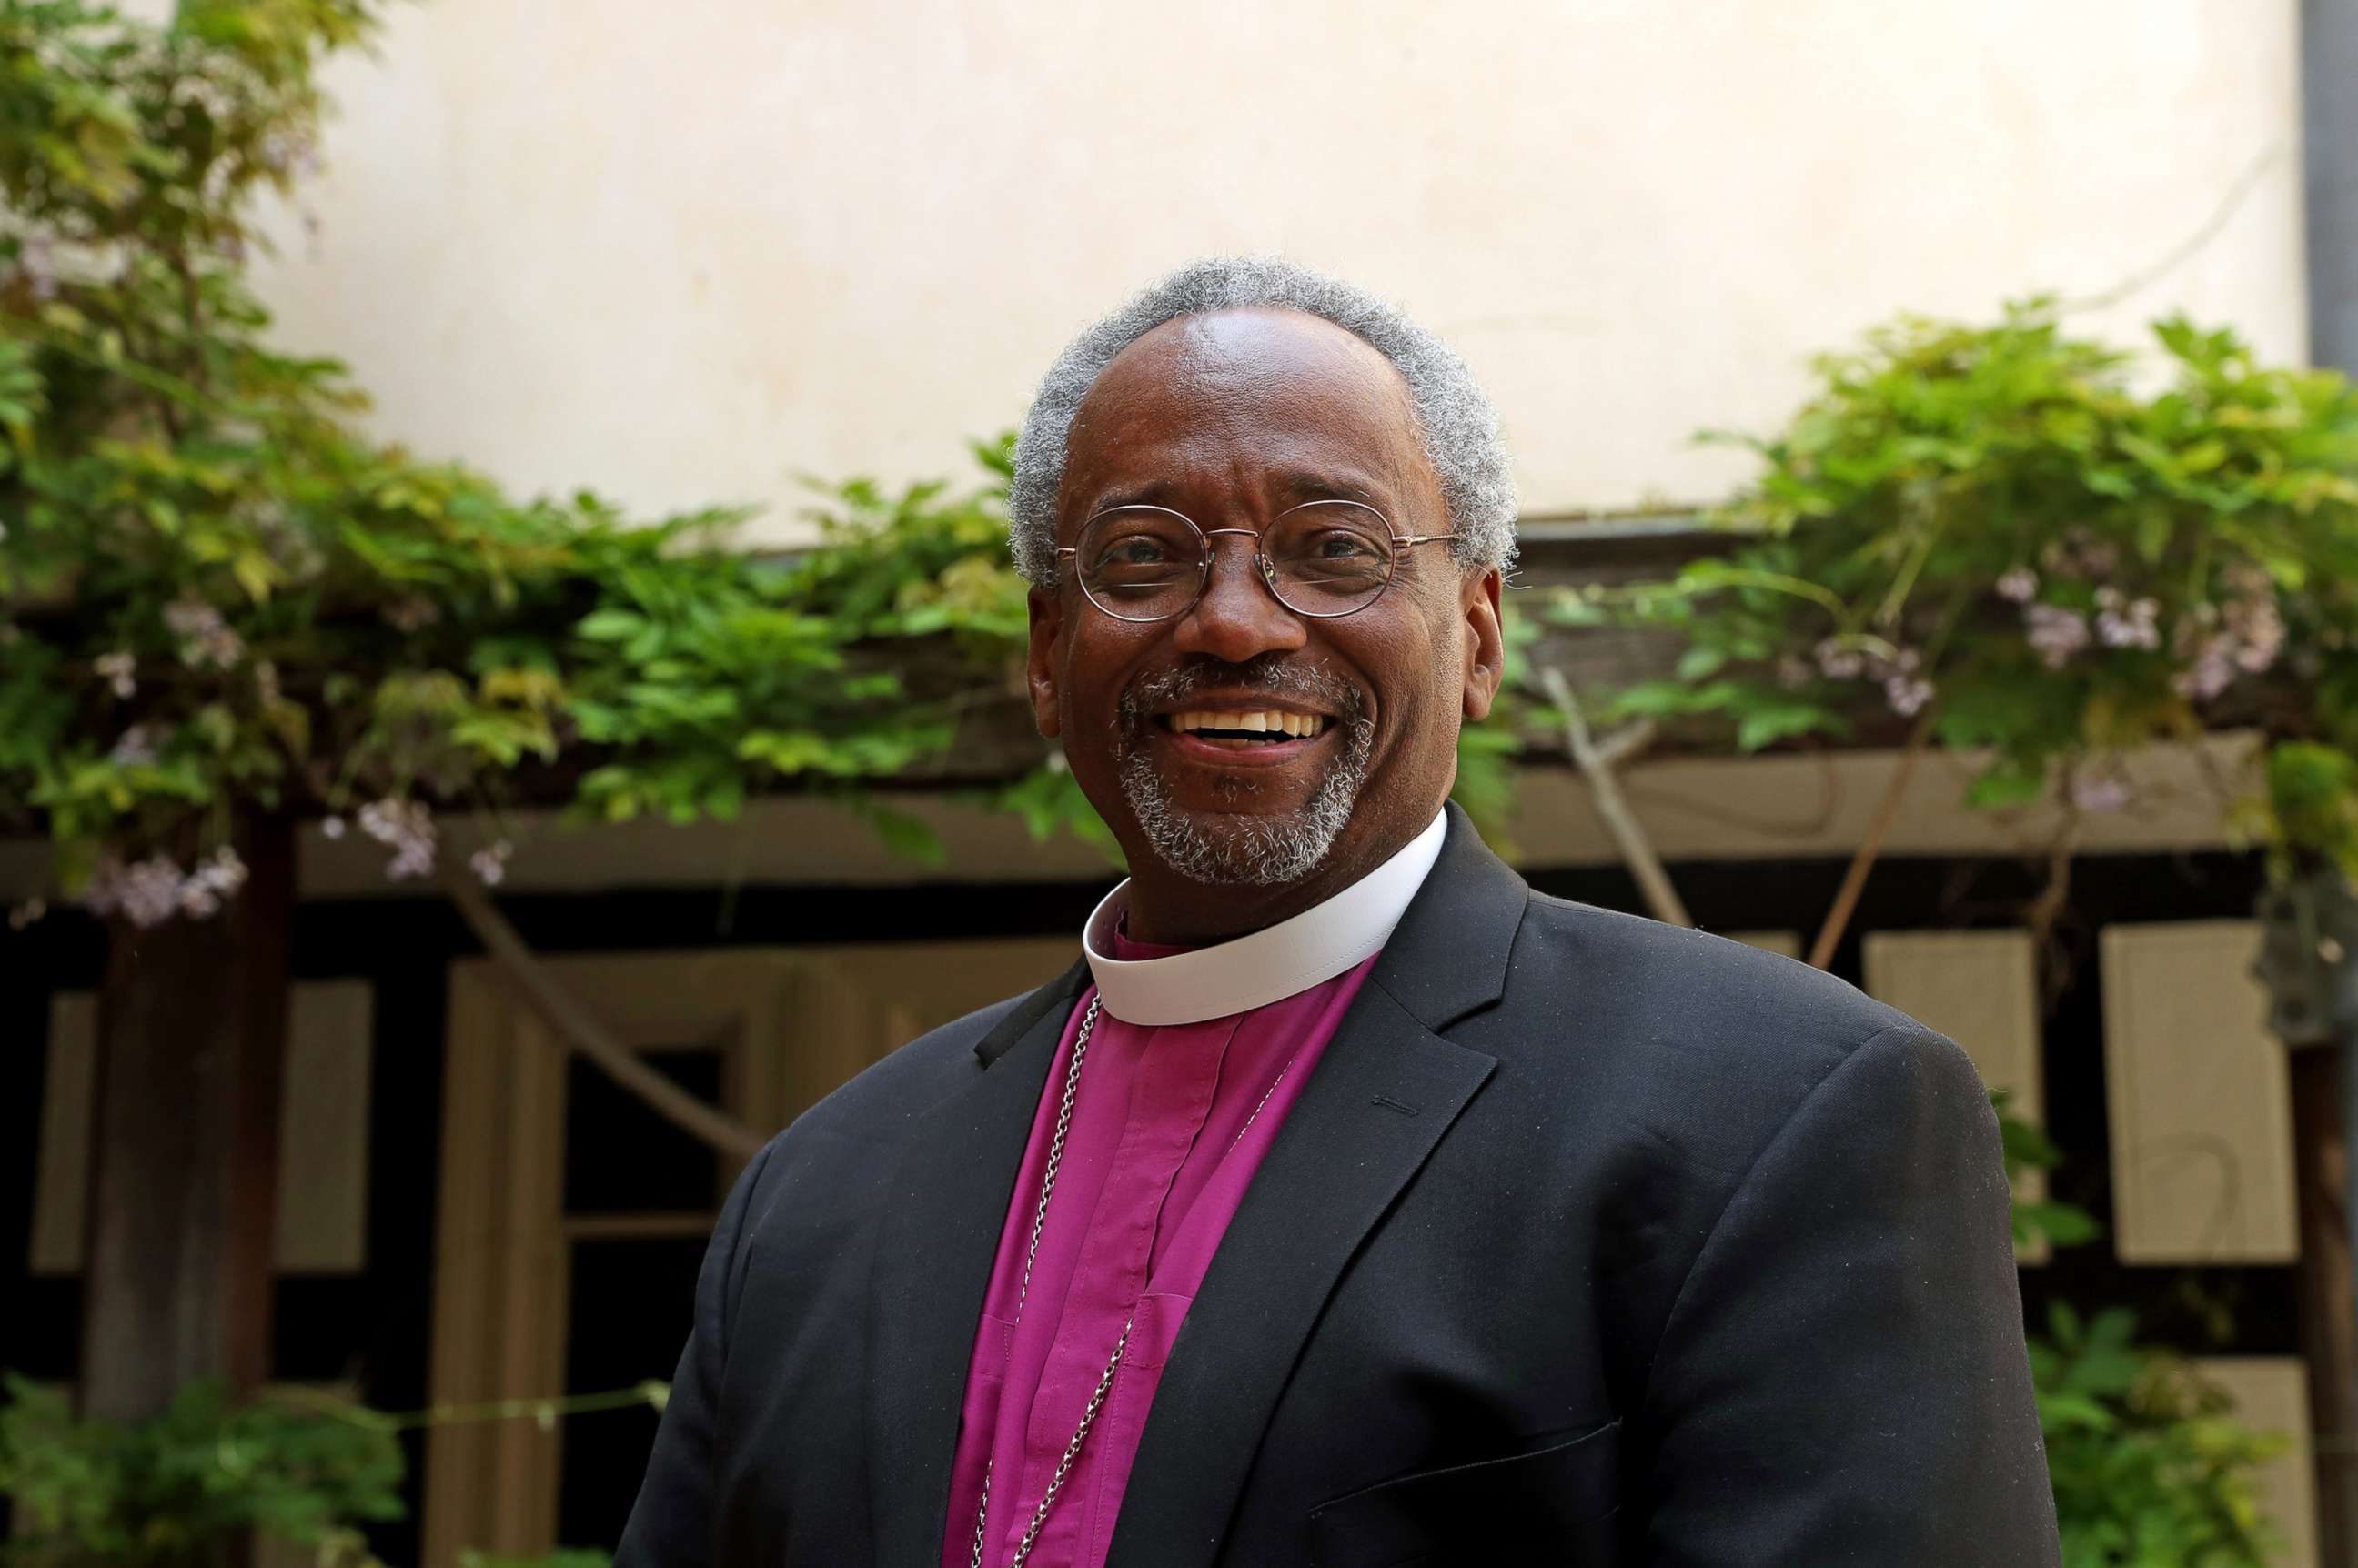 PHOTO: In this May 18, 2018, file photo, Bishop Michael Curry is shown.